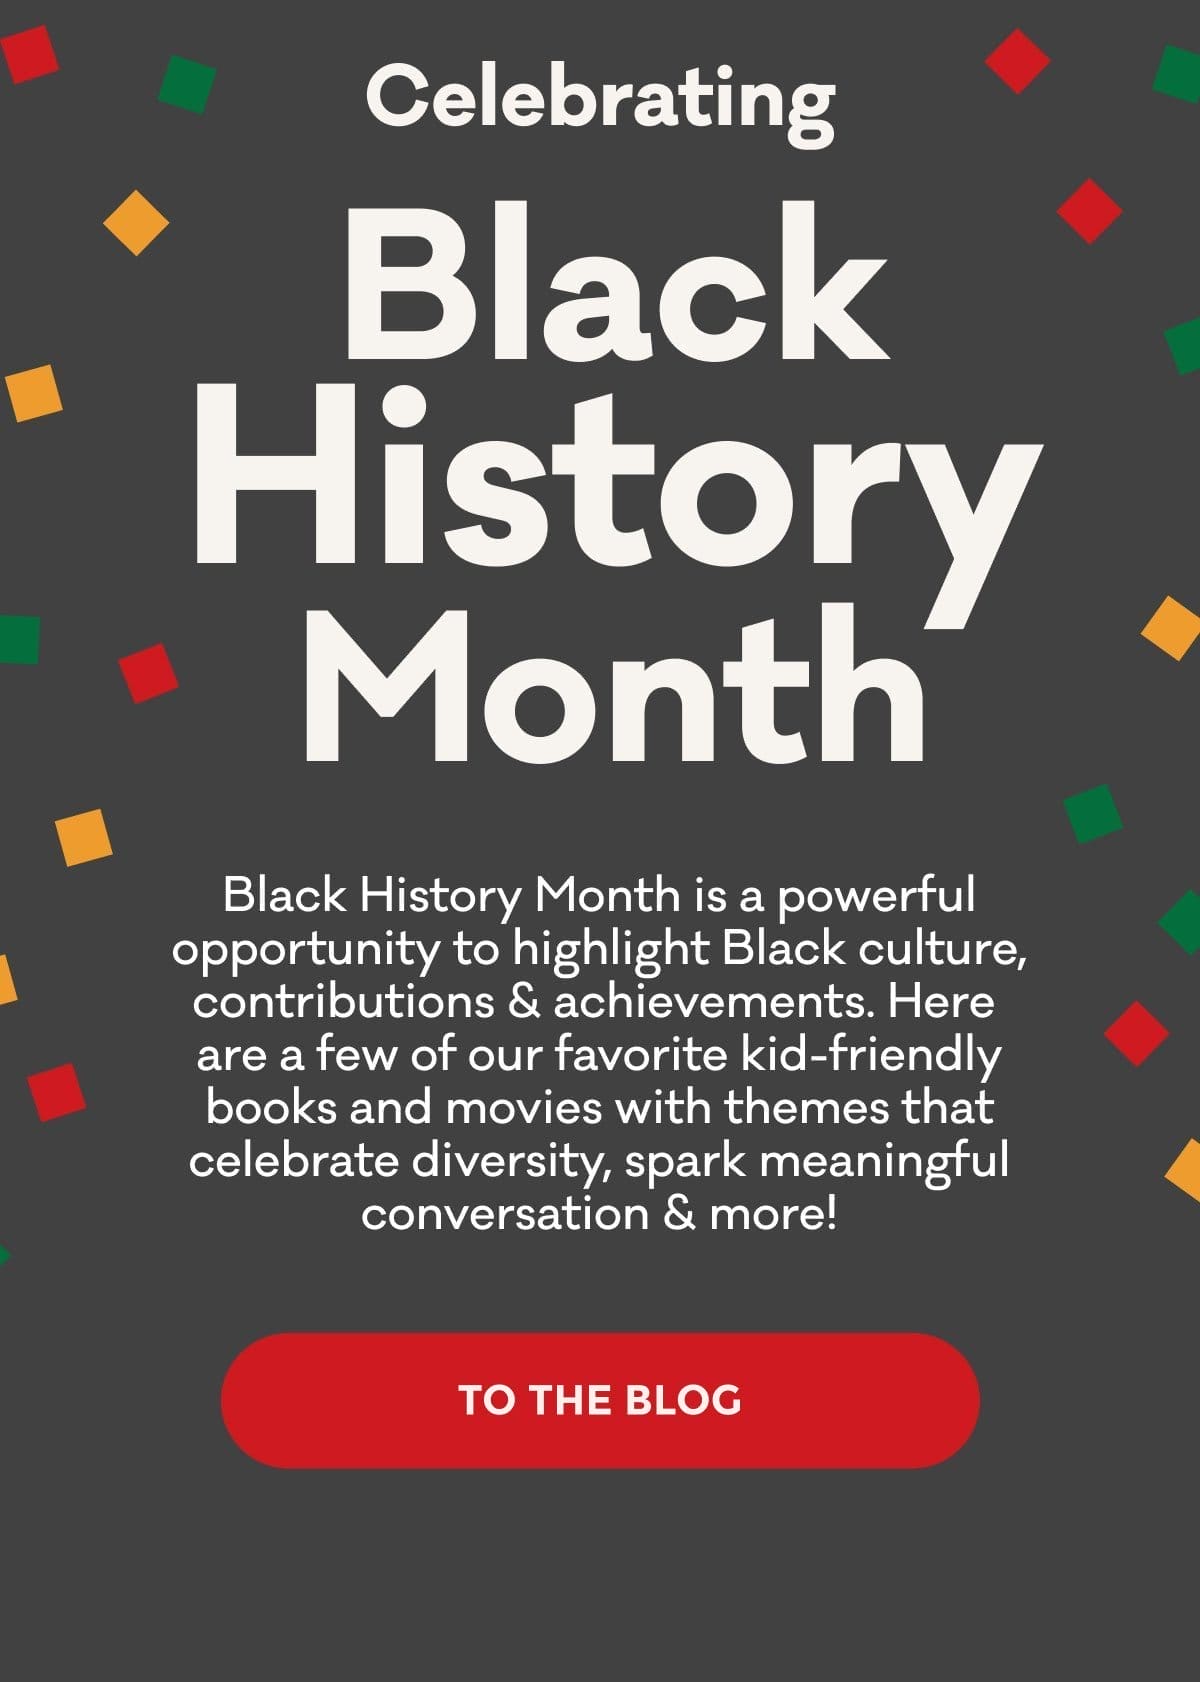 Celebrating Black History Month | Black History Month is a powerful opportunity to highlight Black culture, contributions & achievements. Here are a few of our favorite kid-friendly books and movies with themes that celebrate diversity, spark meaningful conversation & more! | TO THE BLOG